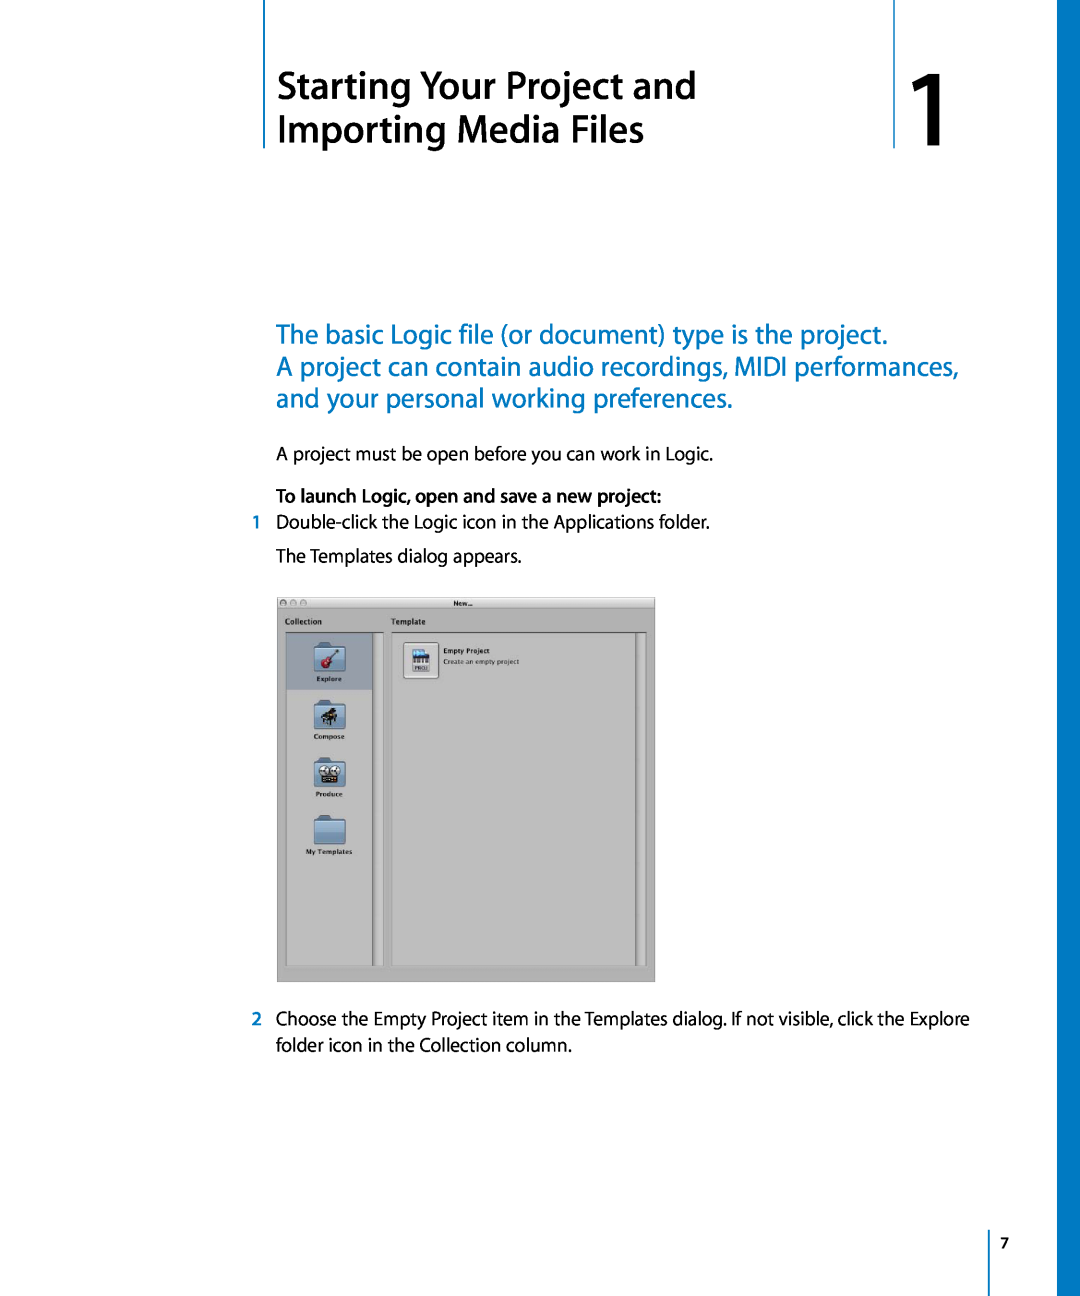 Apple 8 manual 1Starting Your Project and, Importing Media Files, The basic Logic file or document type is the project 